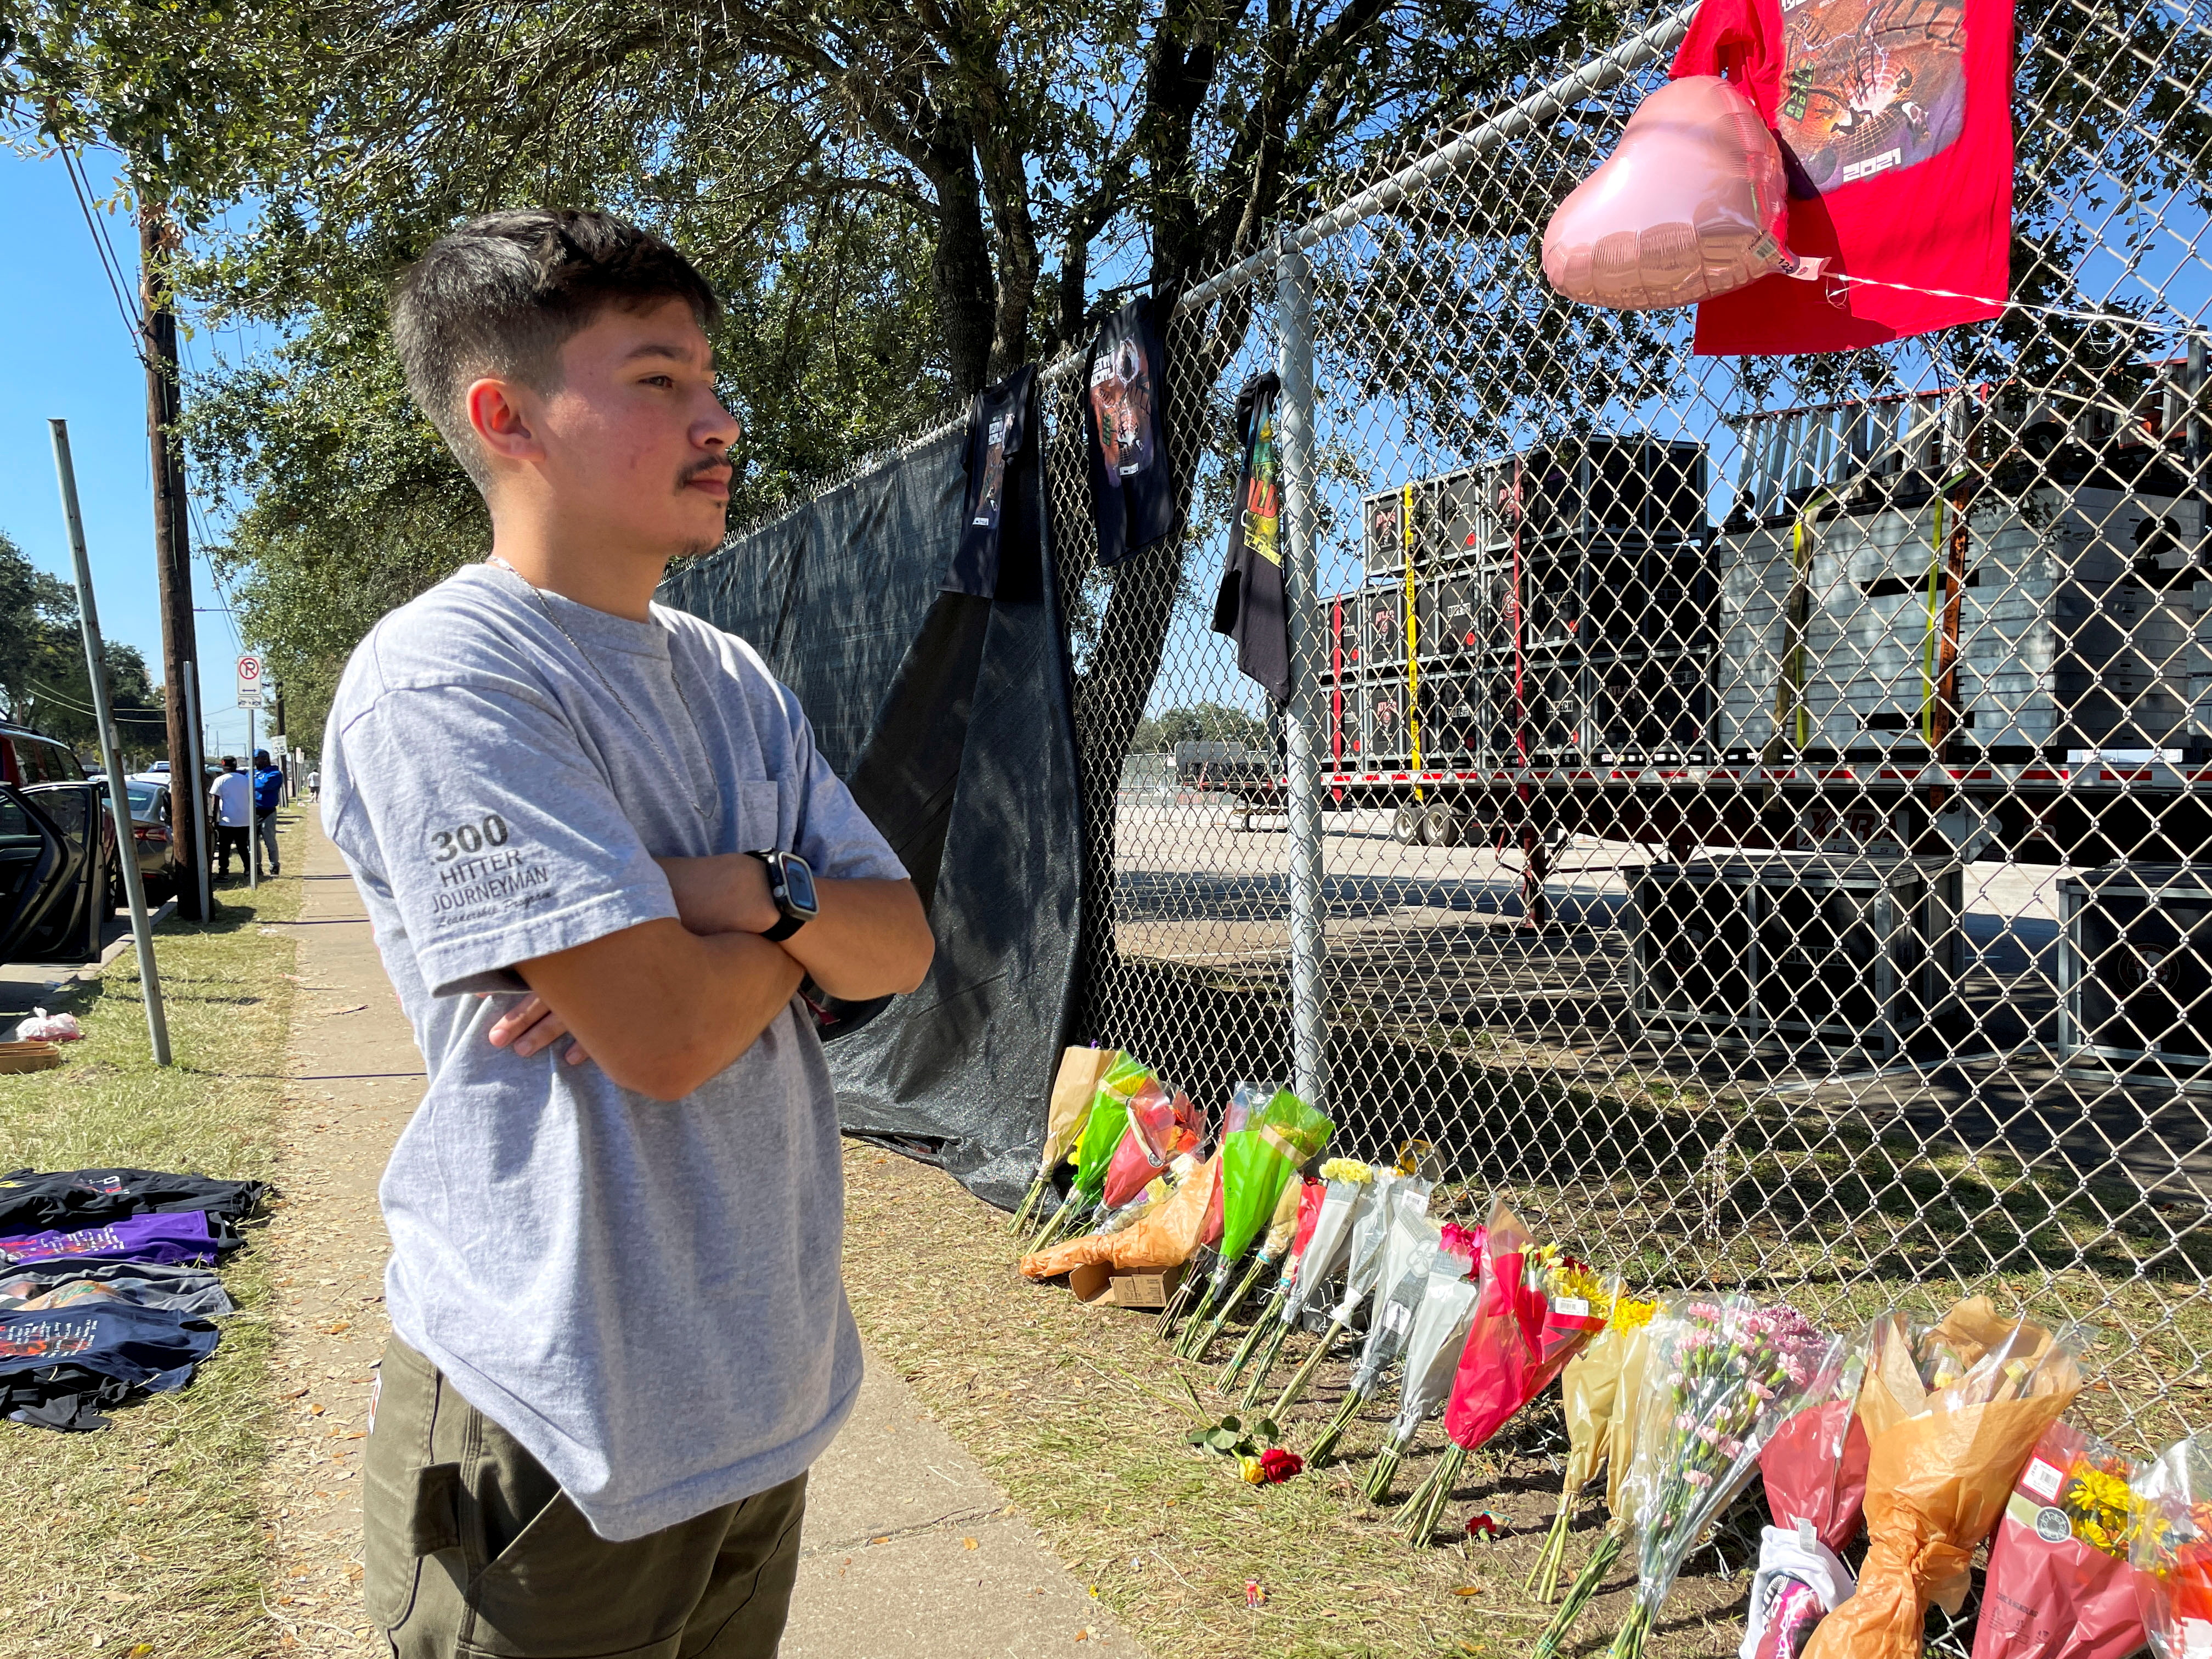 Maximiliano Alvarado, 20, of Houston, visits a makeshift memorial for the concertgoers who died in a stampede at the 2021 Astroworld Festival in Houston, Texas, U.S. November 7, 2021. REUTERS/Nathan Frandino/File Photo